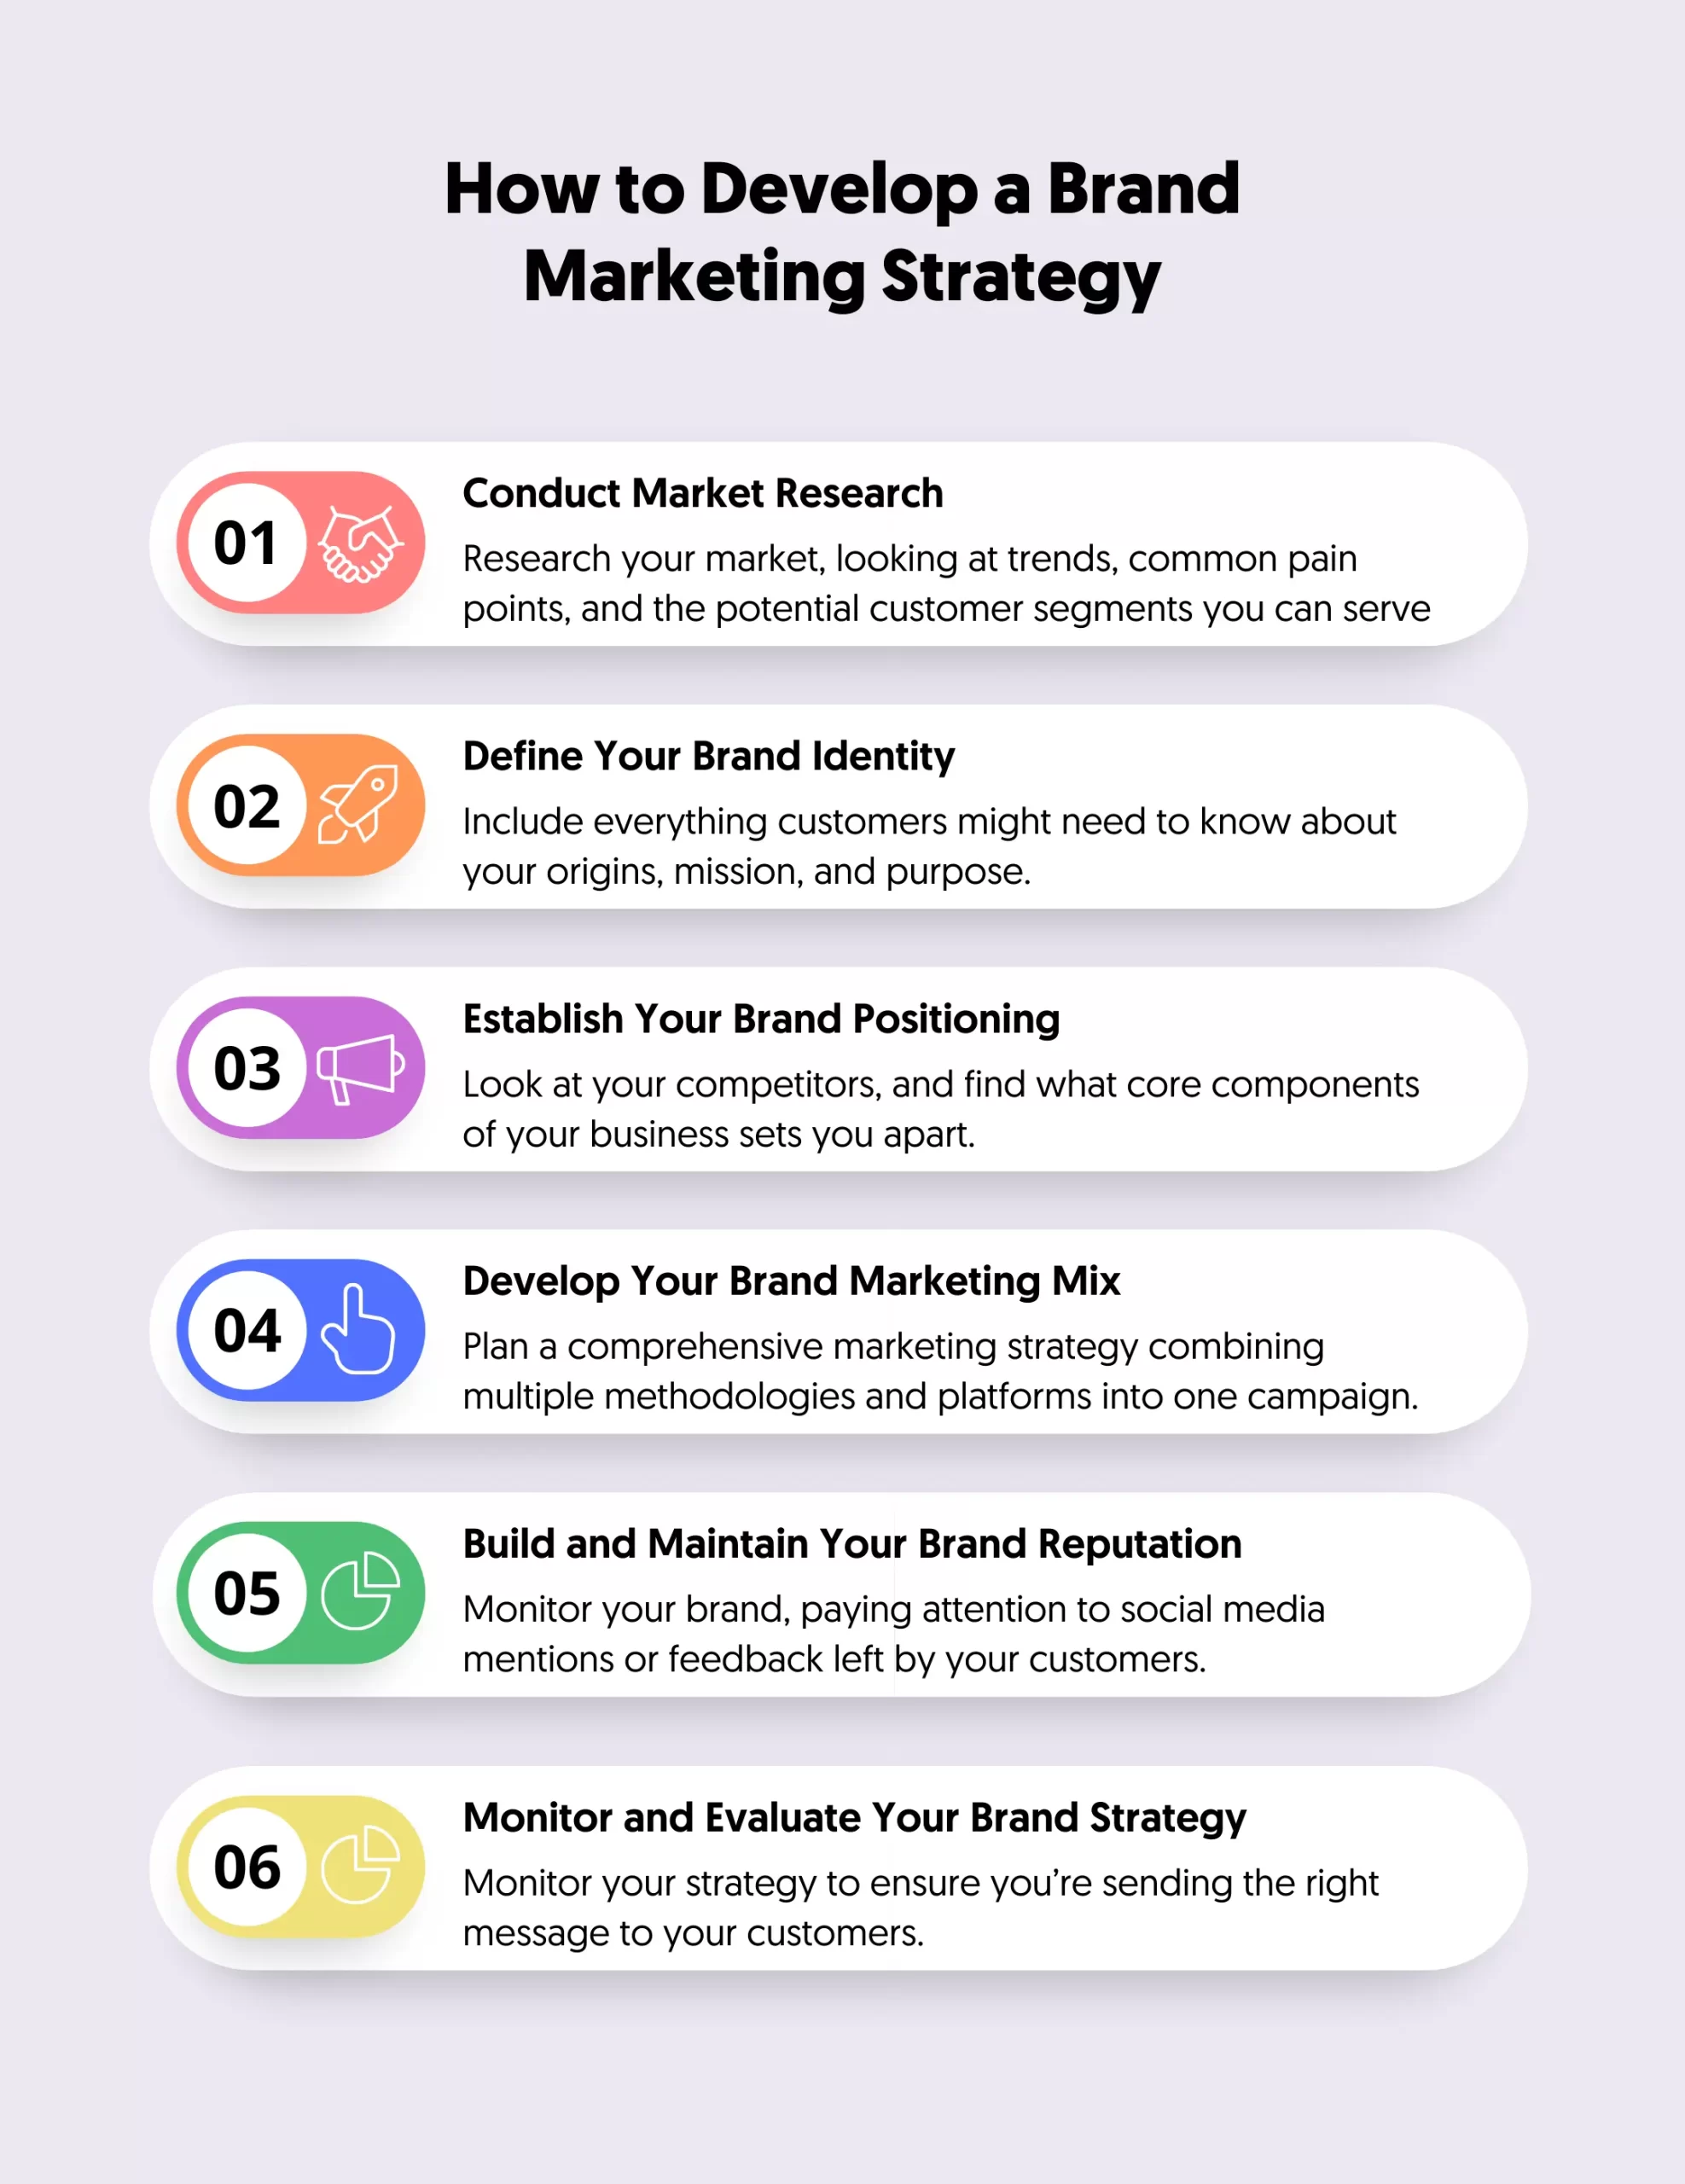 How to Develop a Brand Marketing Strategy